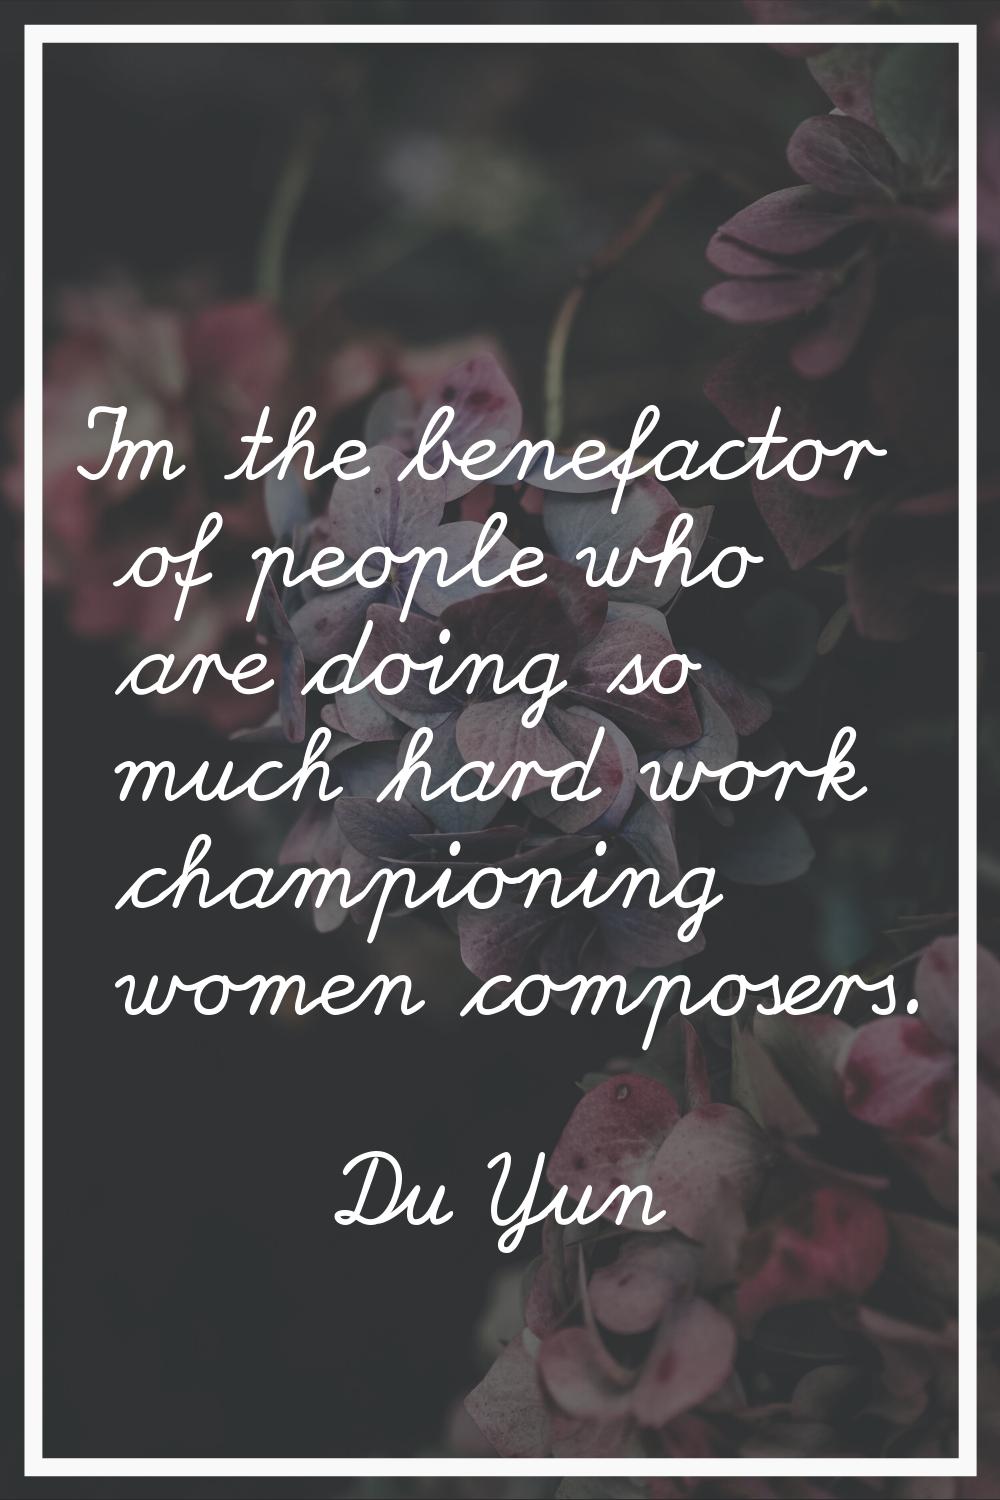 I'm the benefactor of people who are doing so much hard work championing women composers.